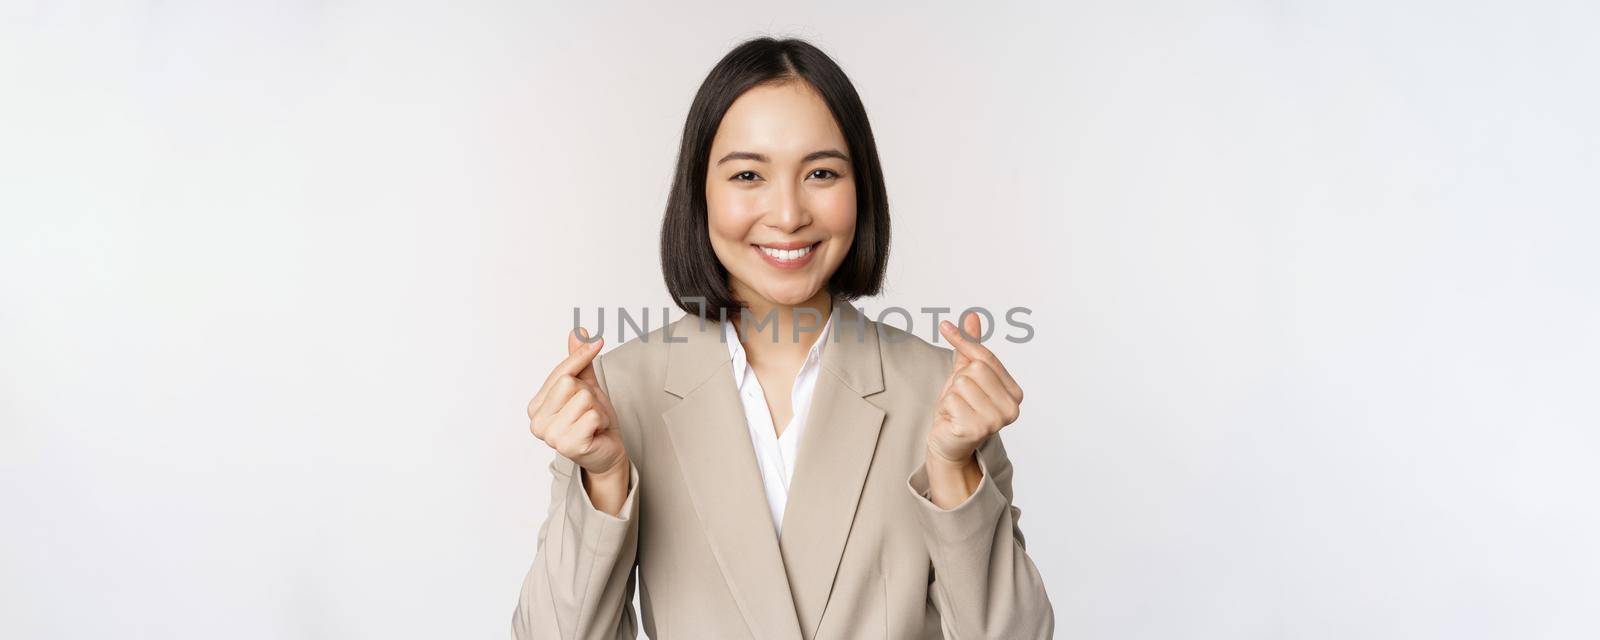 Cheerful asian saleswoman, smiling and showing finger hearts sign, standing in suit over white background.